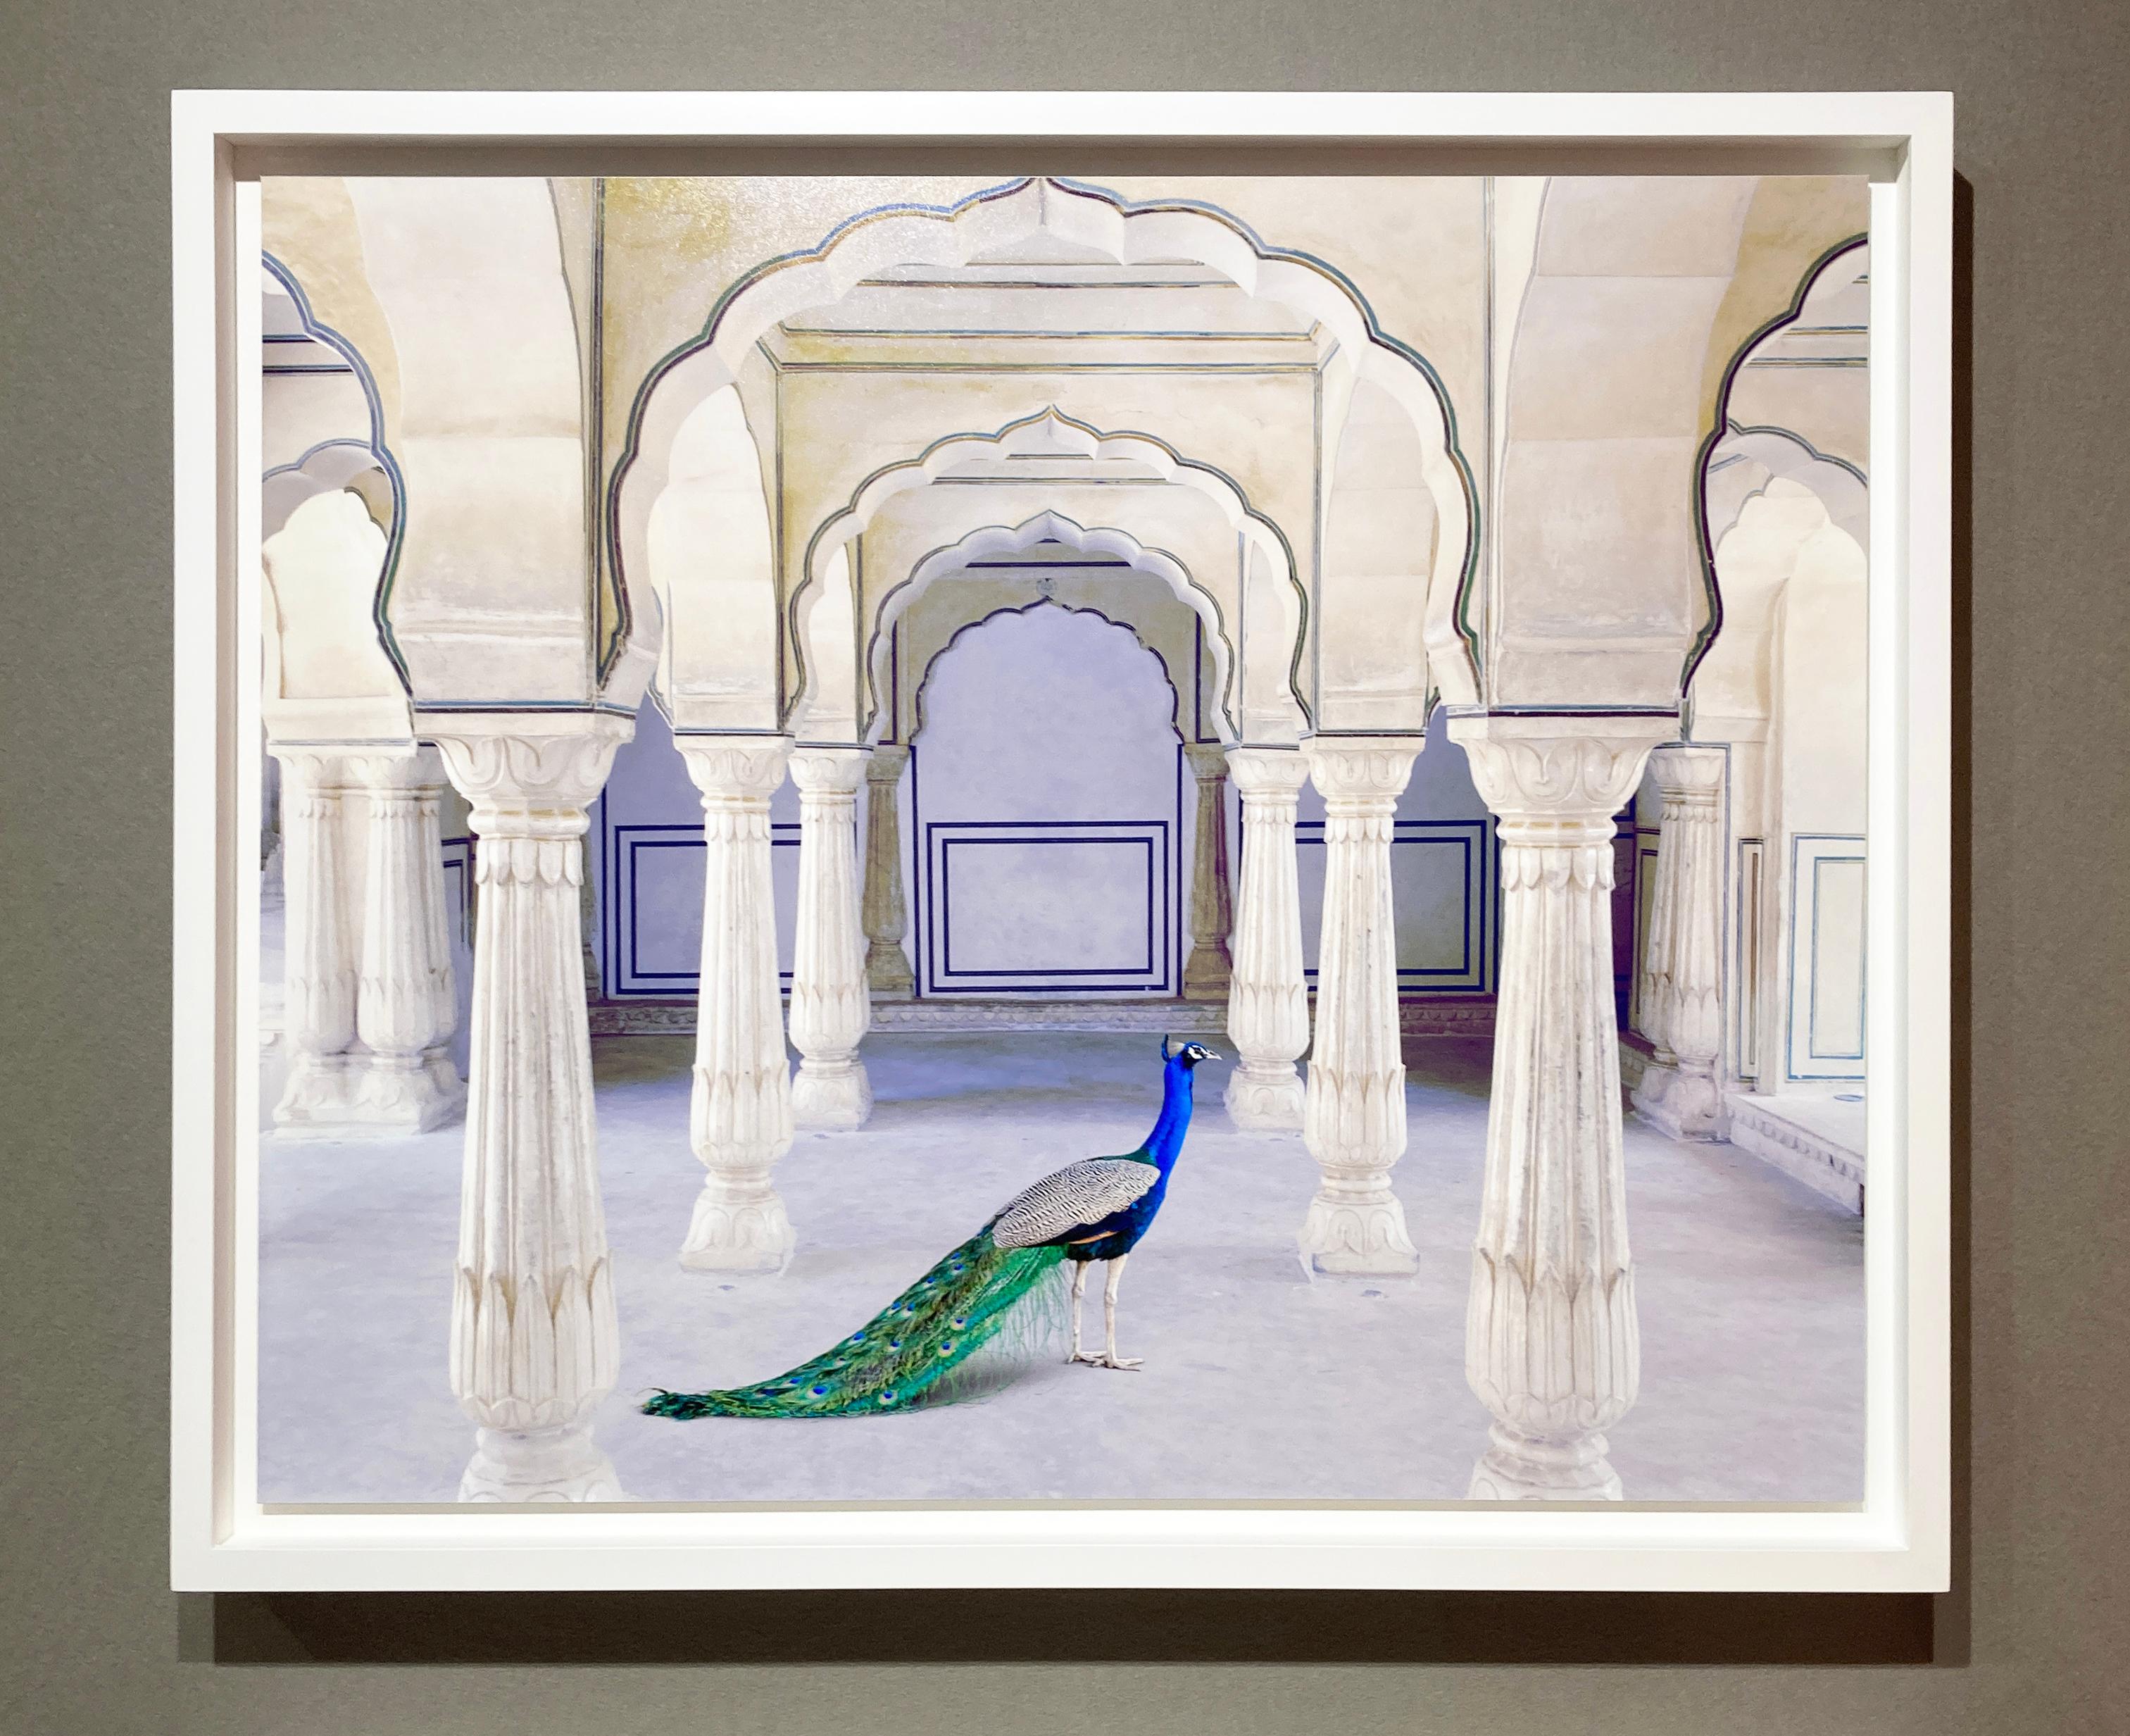 A Moment of Solitude, Amer Fort, Amer - Photograph by Karen Knorr